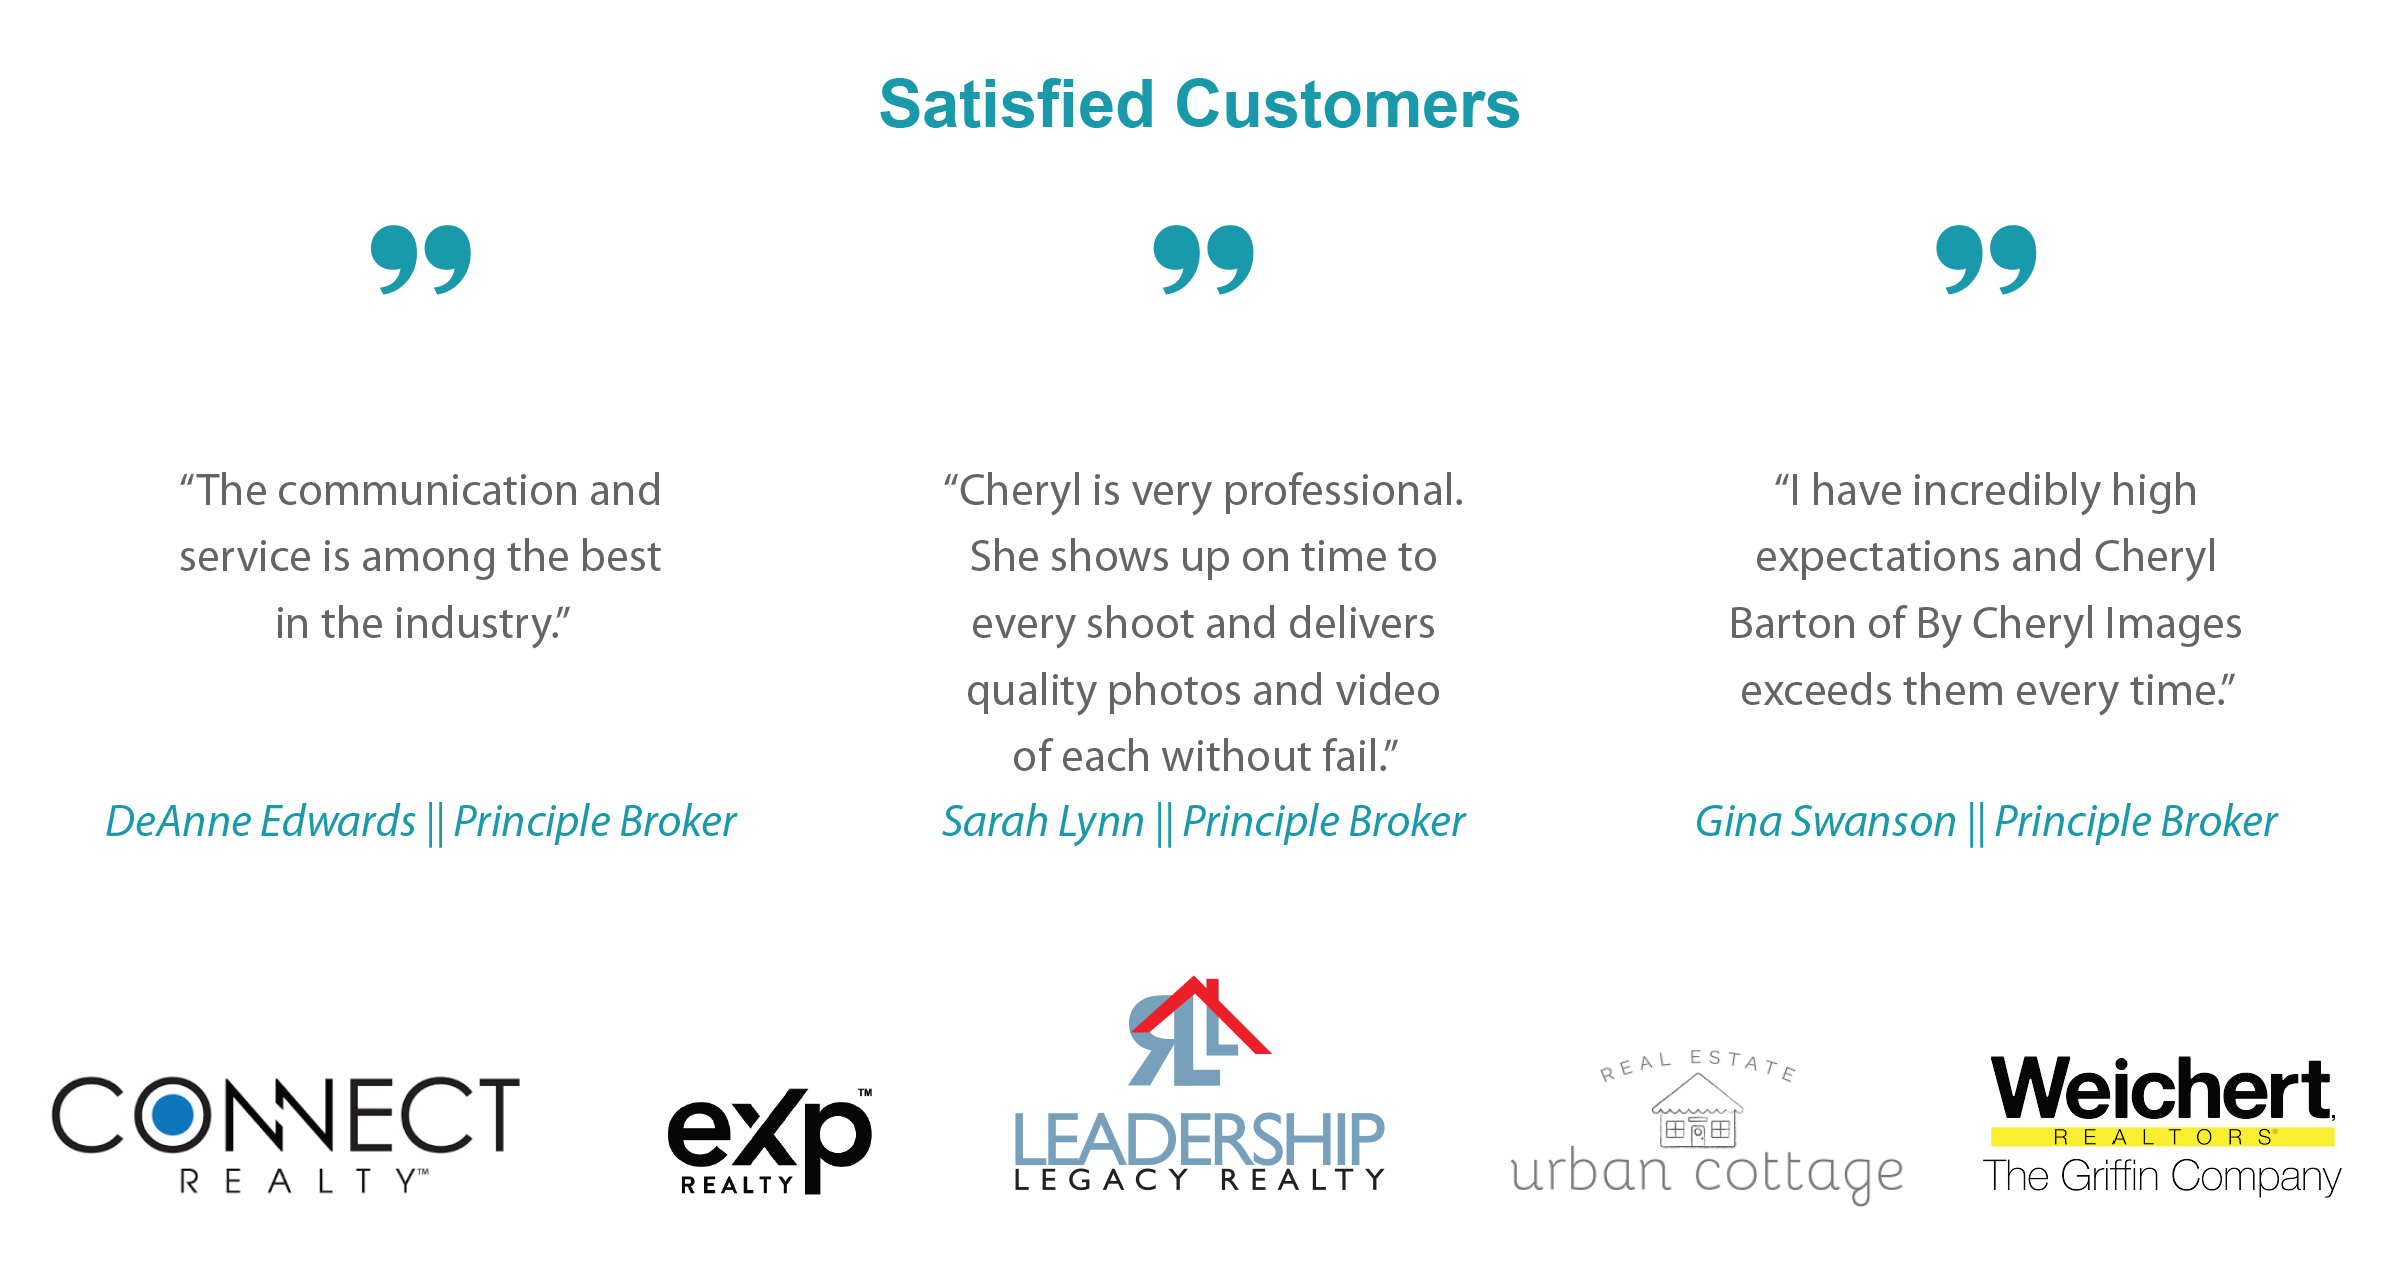 Satisfied-Customers quotes and company logos